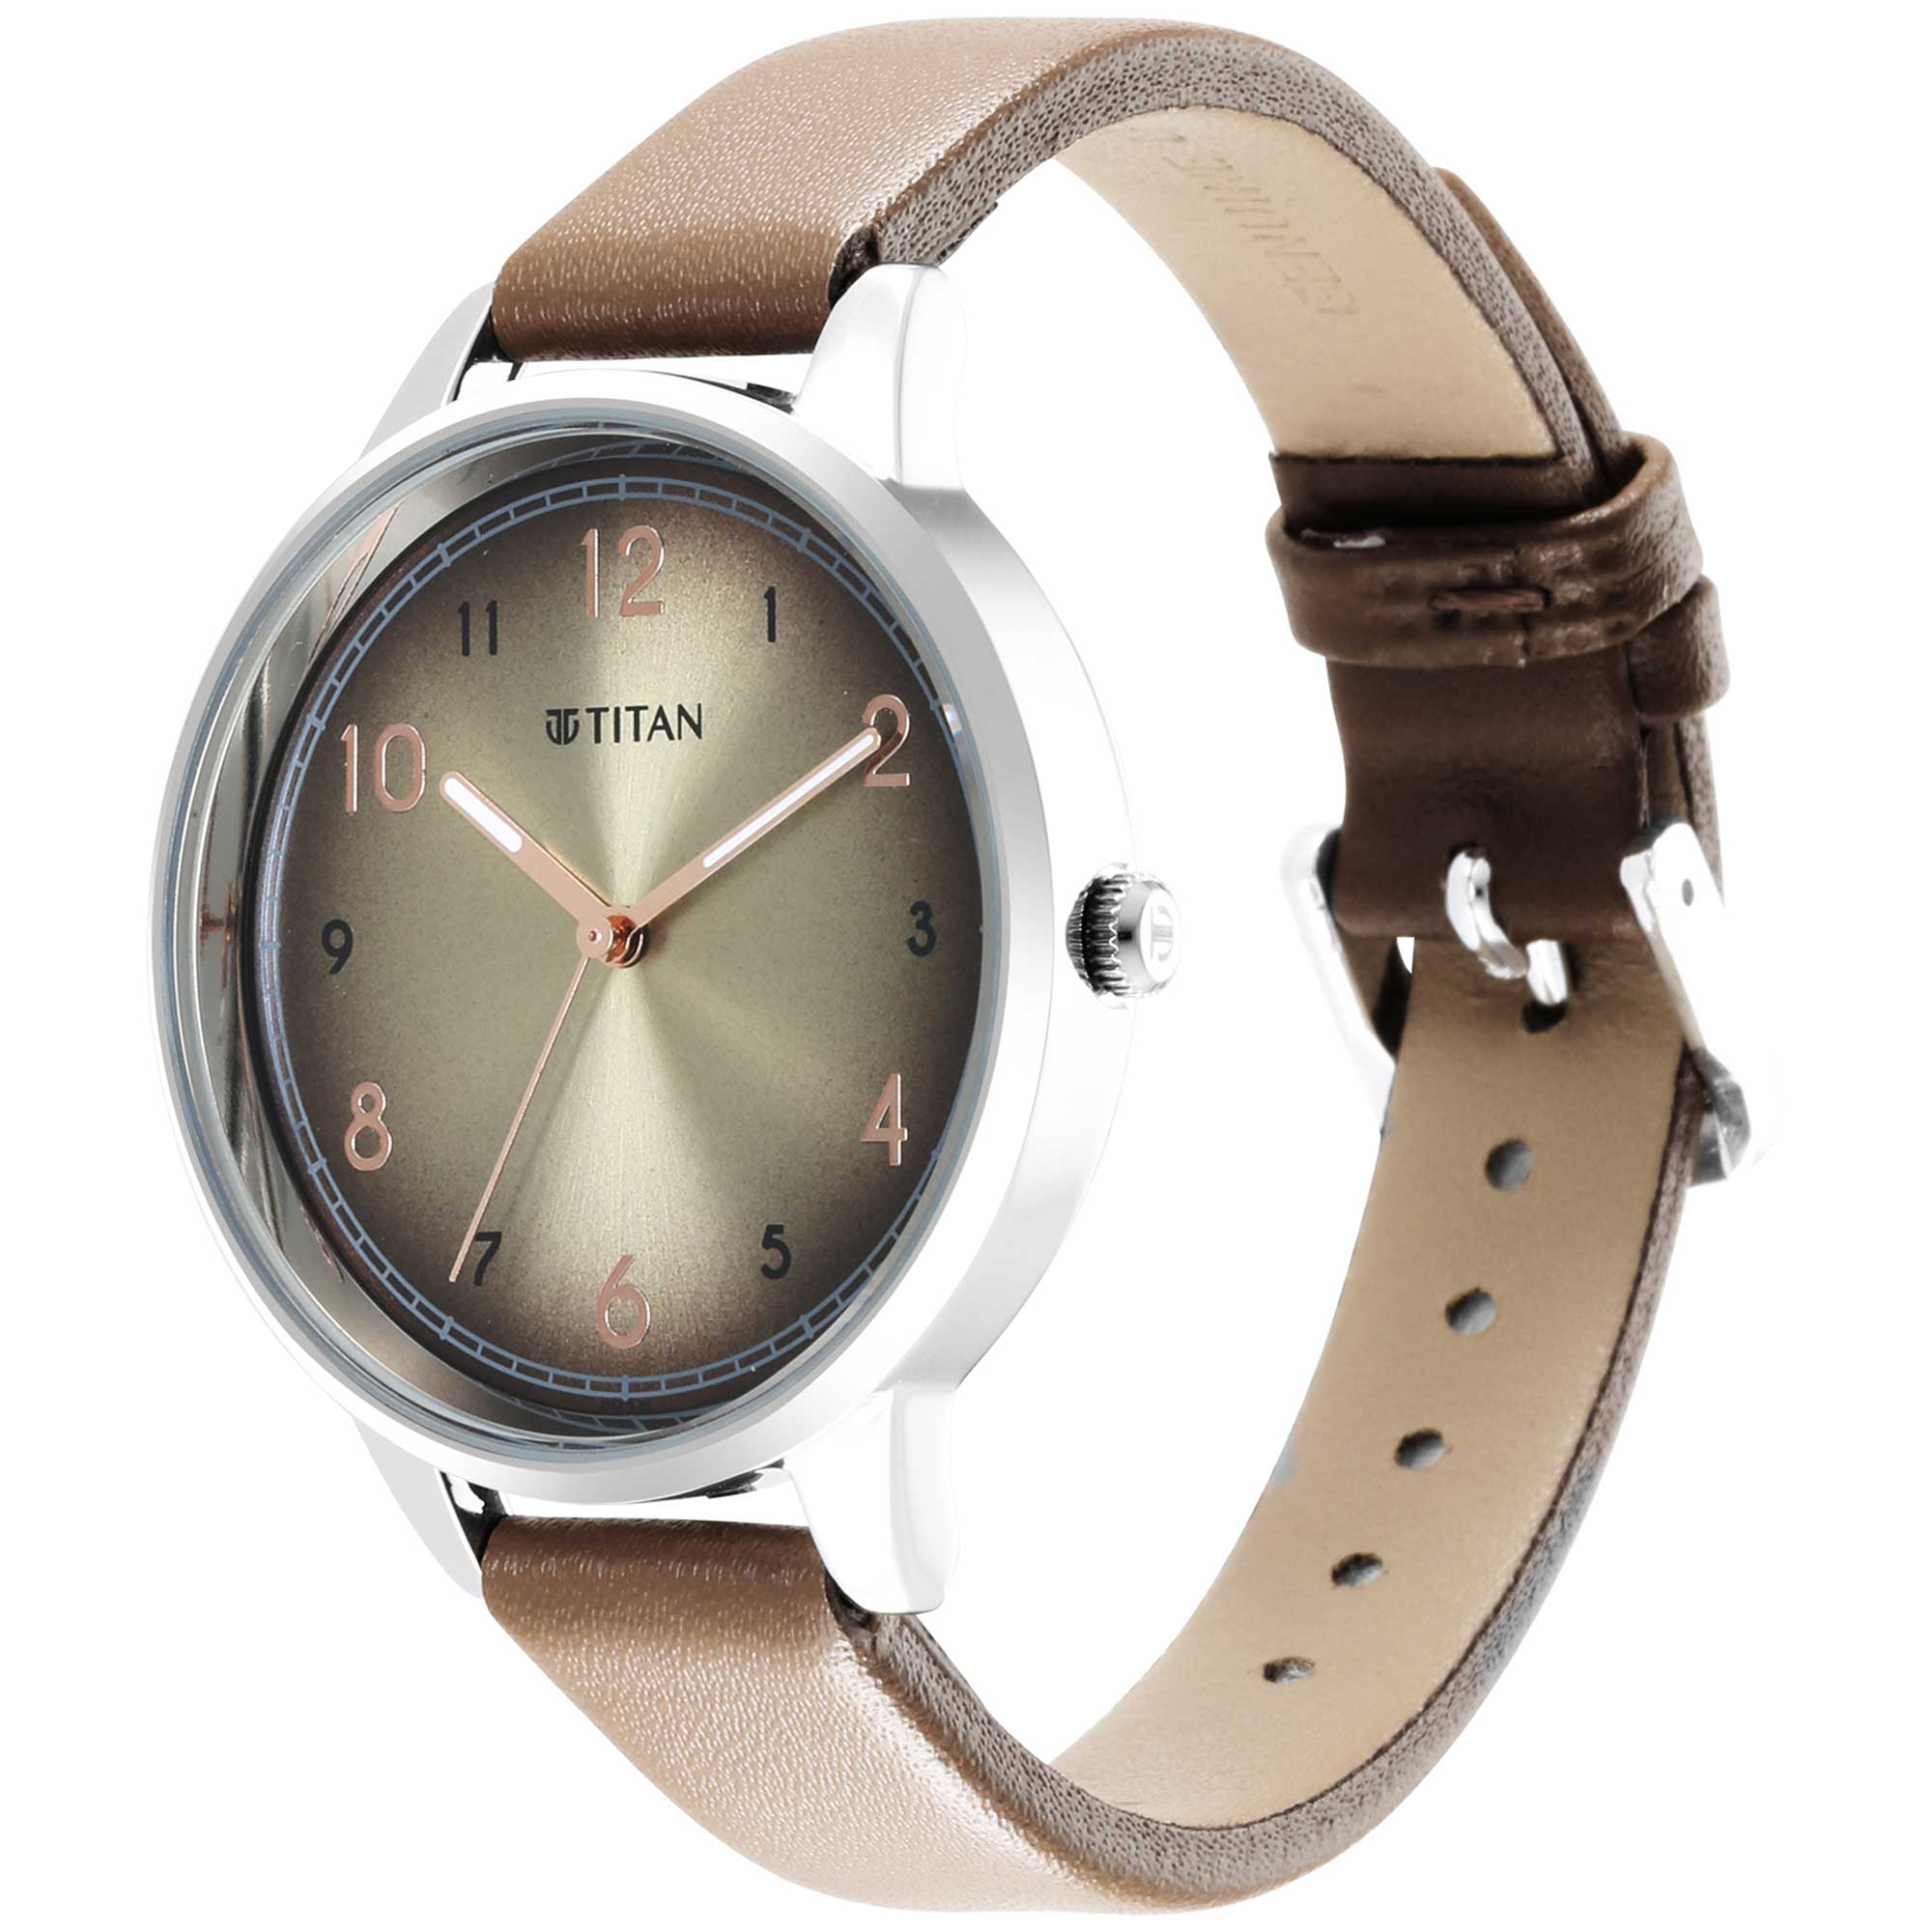 Titan Trendsetters Beige Dial Women Watch With Leather Strap